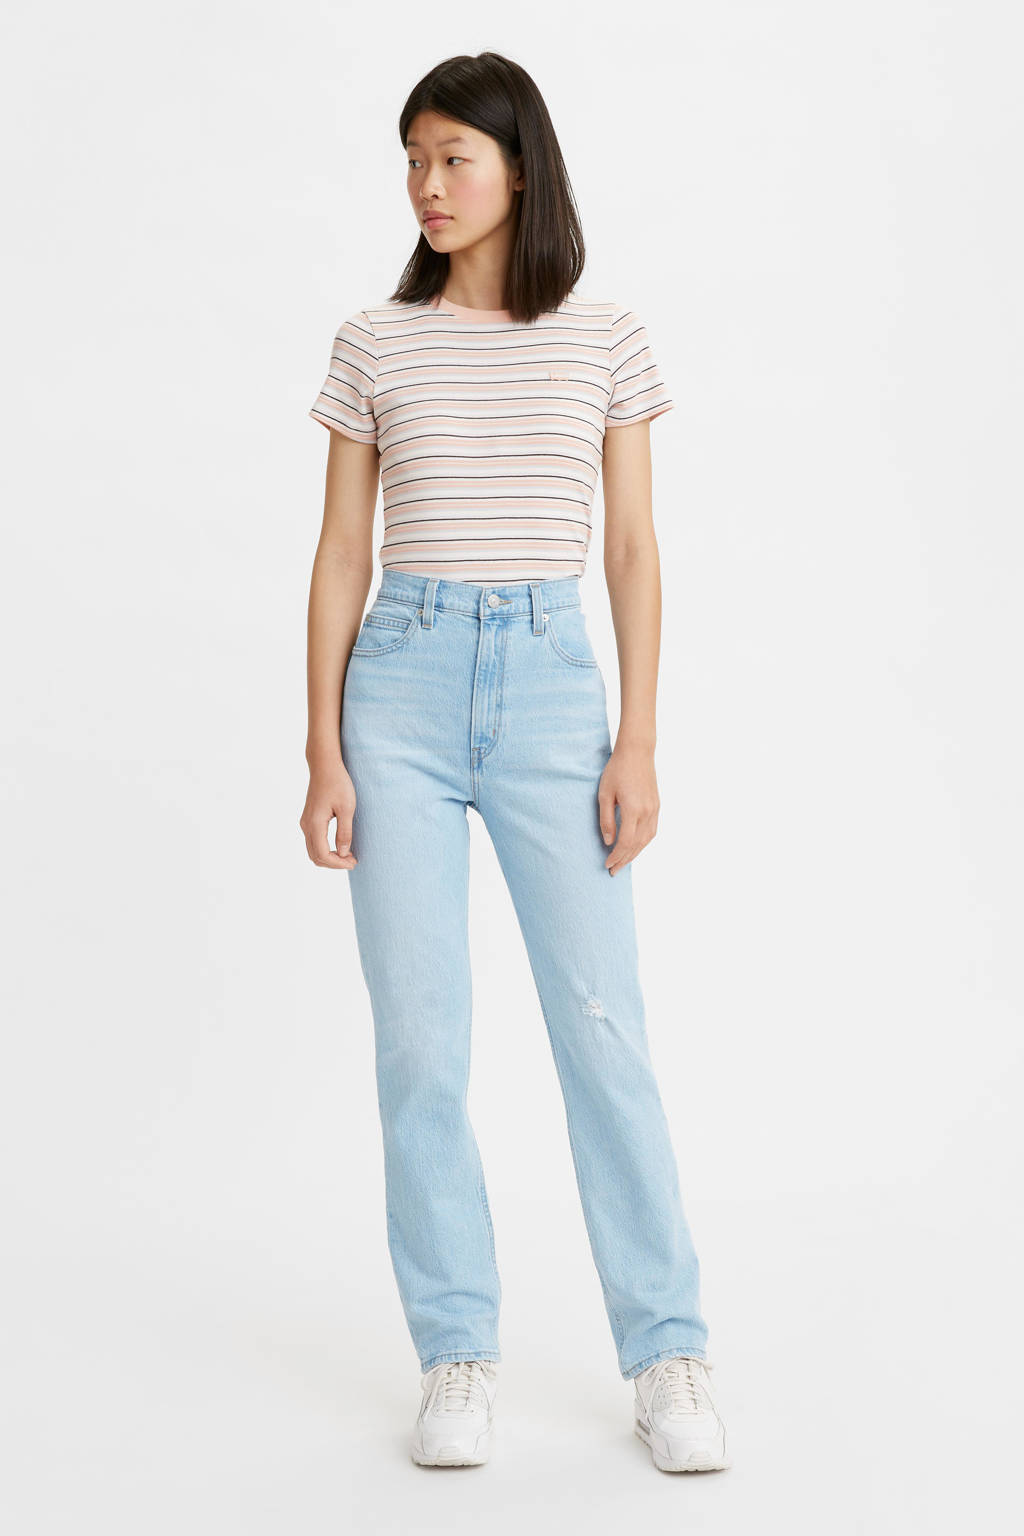 Levi's 70's high waist straight fit jeans marin hits